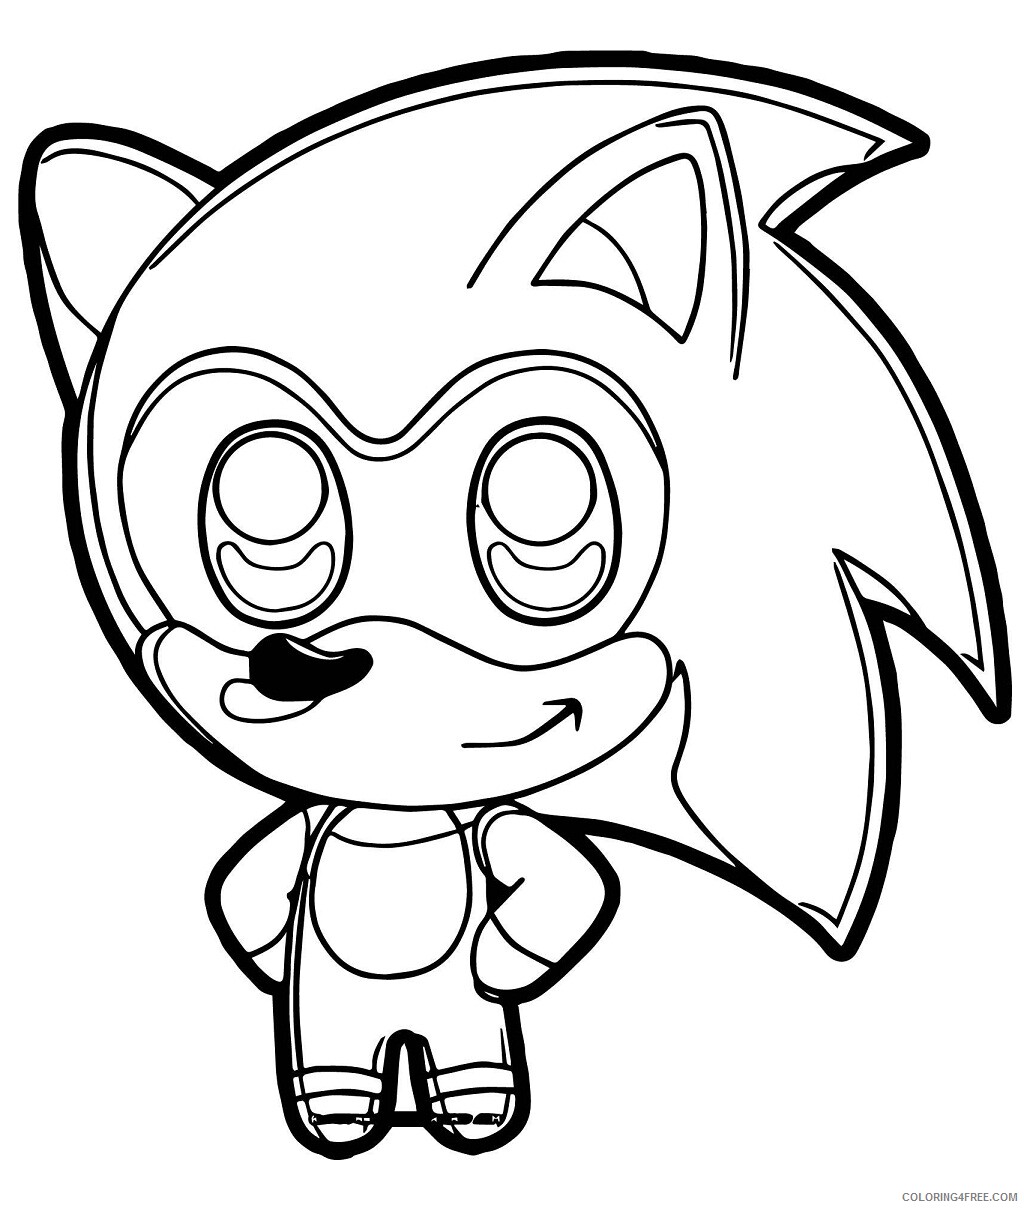 Download Sonic Coloring Pages Games Sonic The Hedgehog Printable 2021 1054 Coloring4free Coloring4free Com